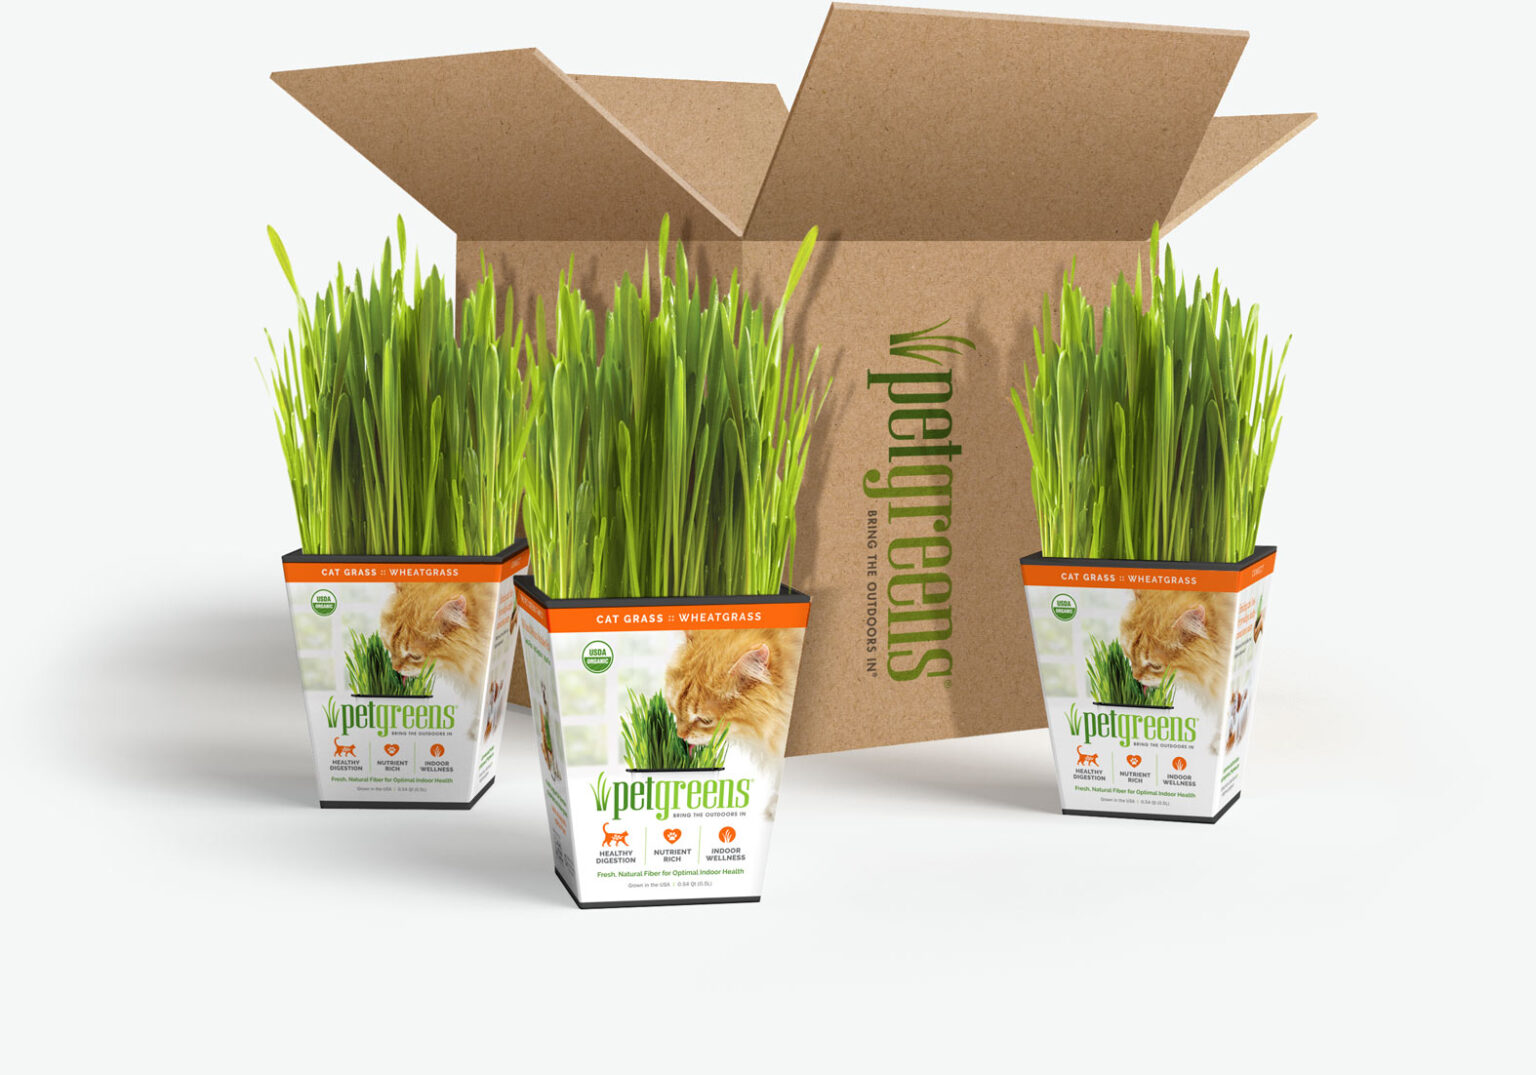 3 live cat grass pots and shipping box